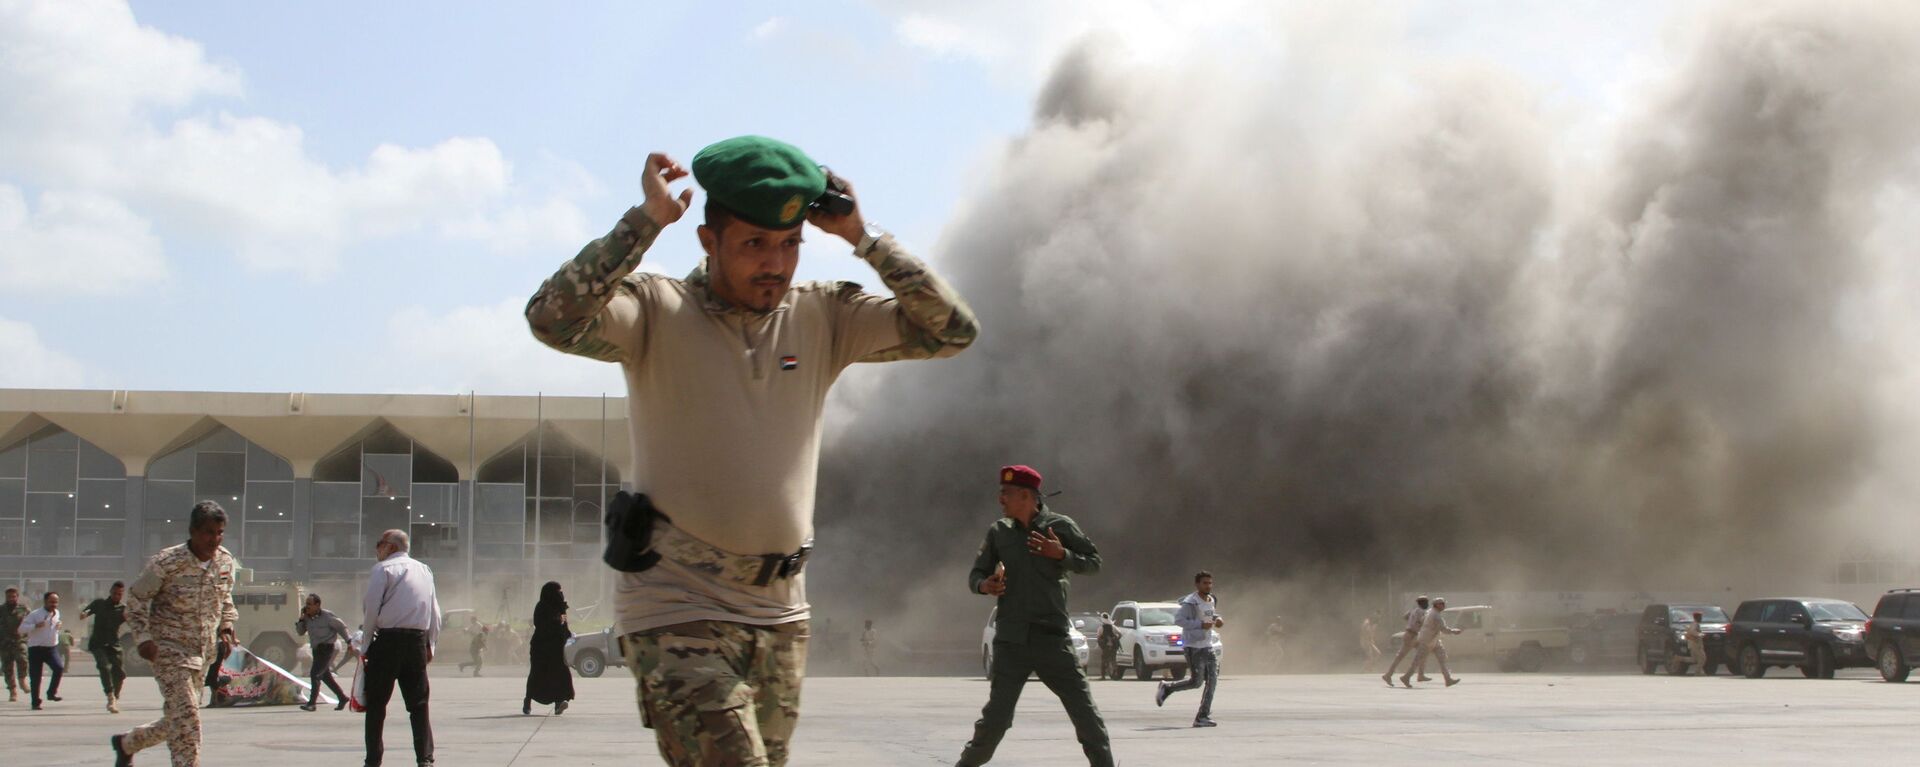 A security personnel member reacts as dust rises after explosions hit Aden airport, upon the arrival of the newly-formed Yemeni government in Aden, Yemen December 30, 2020. - 俄羅斯衛星通訊社, 1920, 13.06.2021